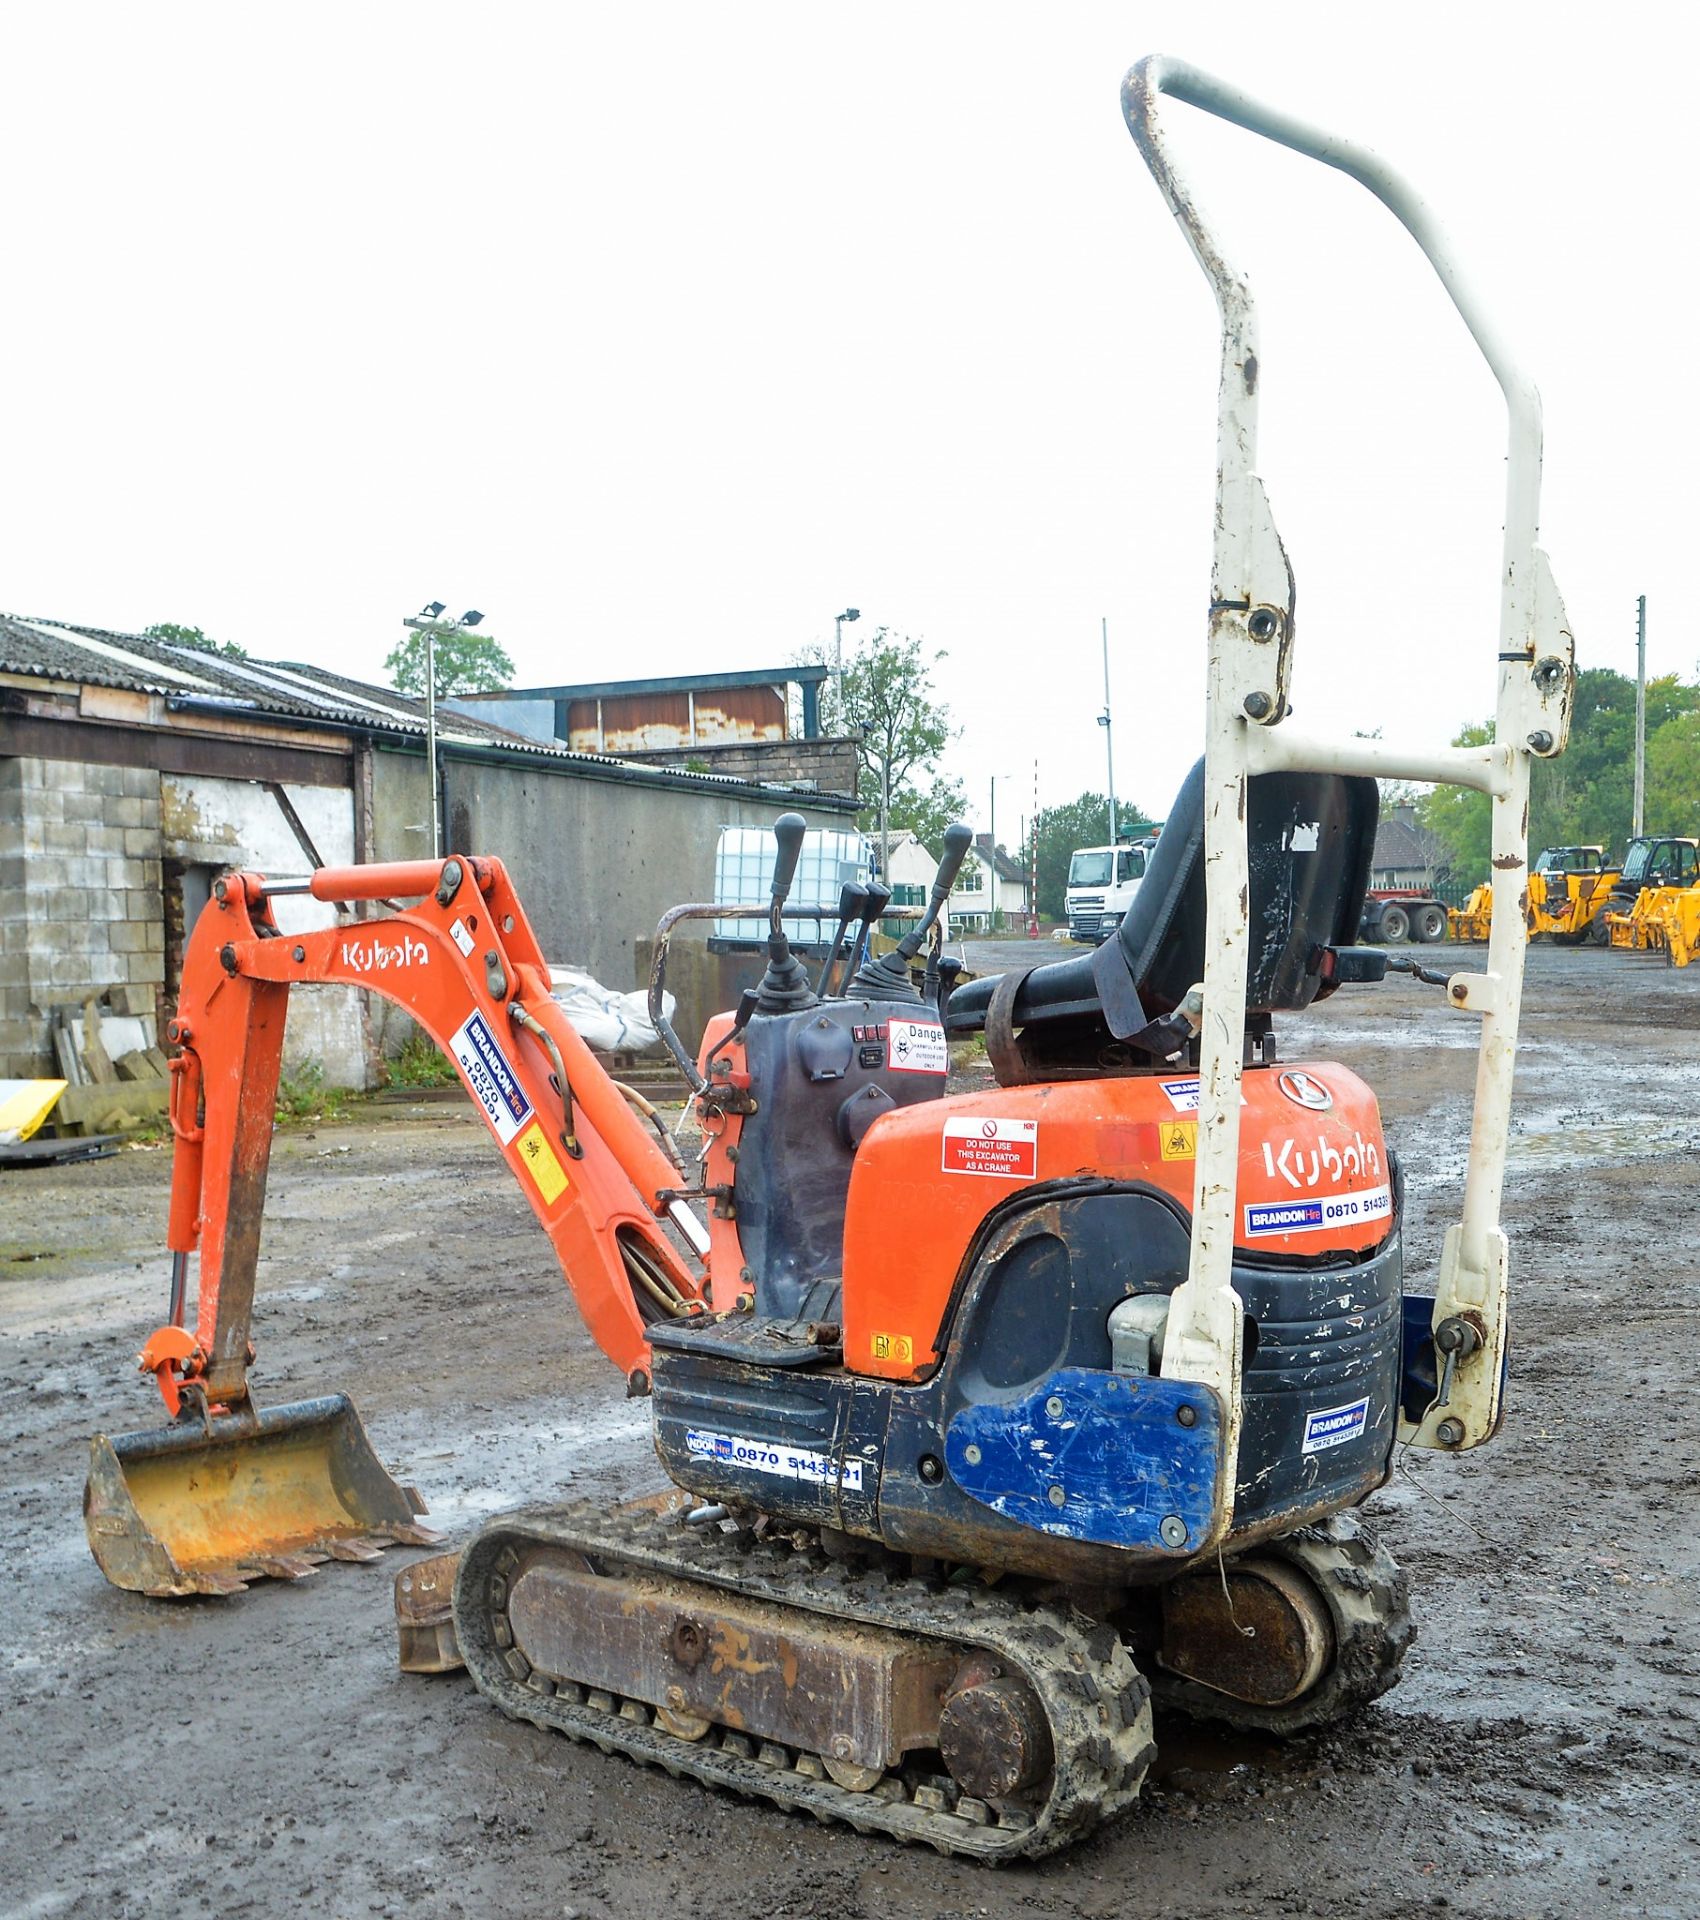 Kubota KX008-3 850 kg rubber tracked micro excavator Year: 2004 S/N: 12445 Recorded Hours: 4414 - Image 4 of 10